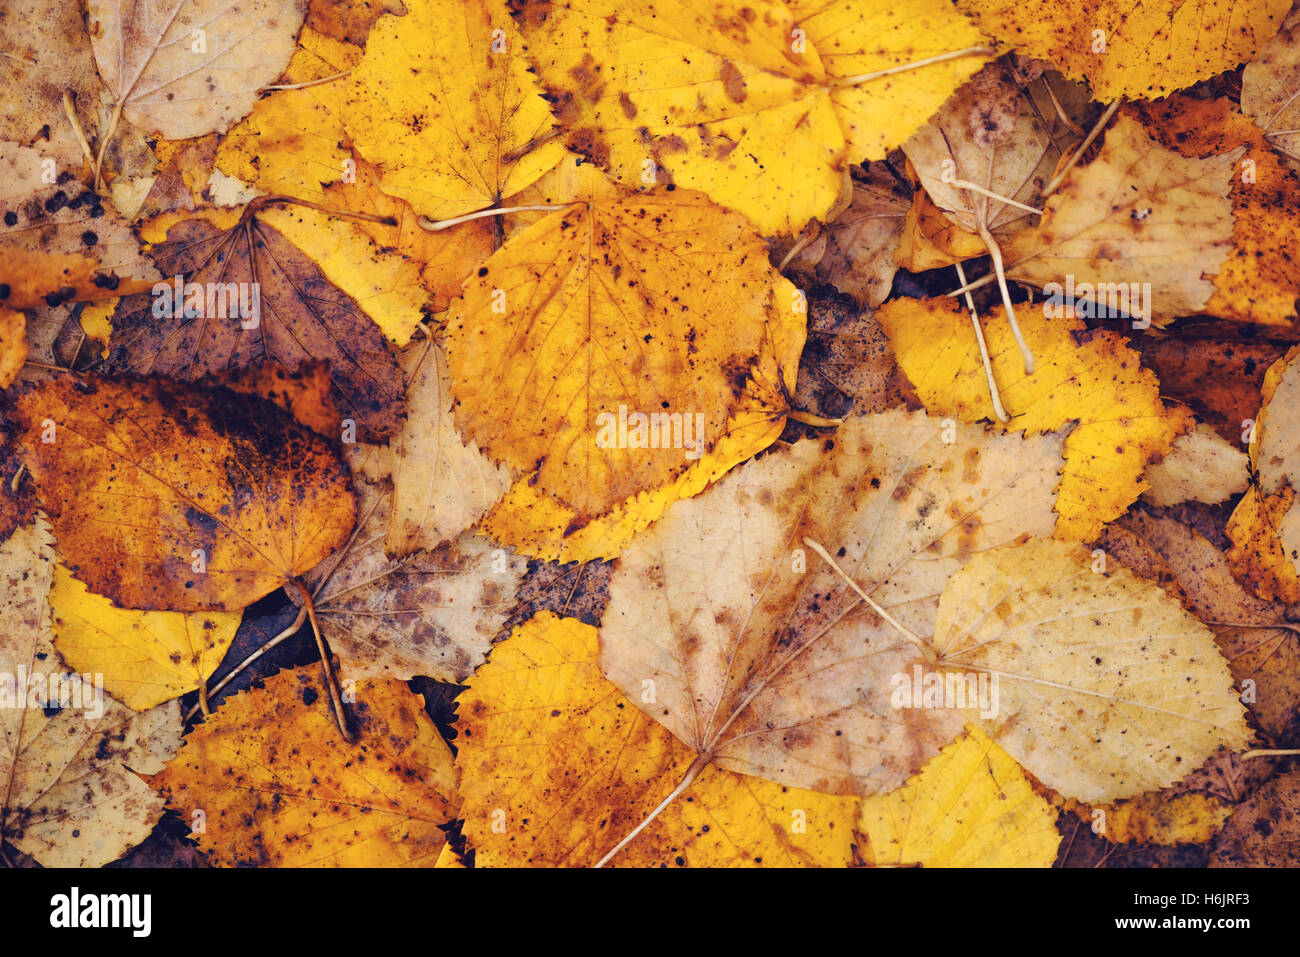 Wet autumn leaves on the ground as background, fall season texture Stock Photo